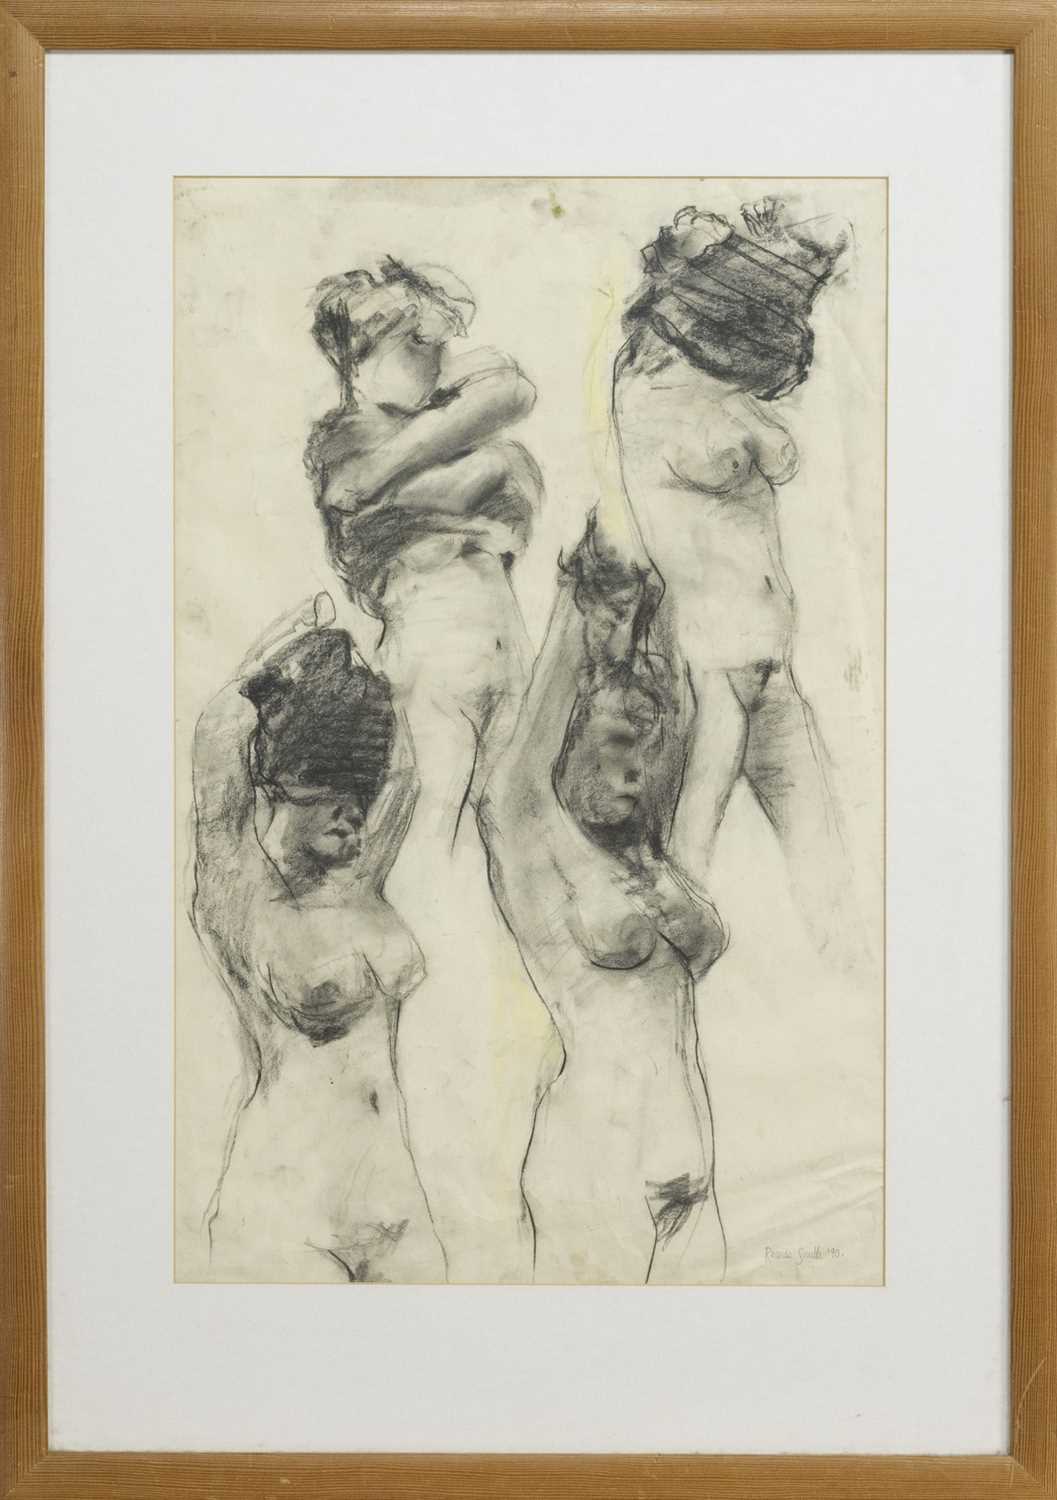 NUDE STUDIES, A CHARCOAL BY RHONDA SMITH